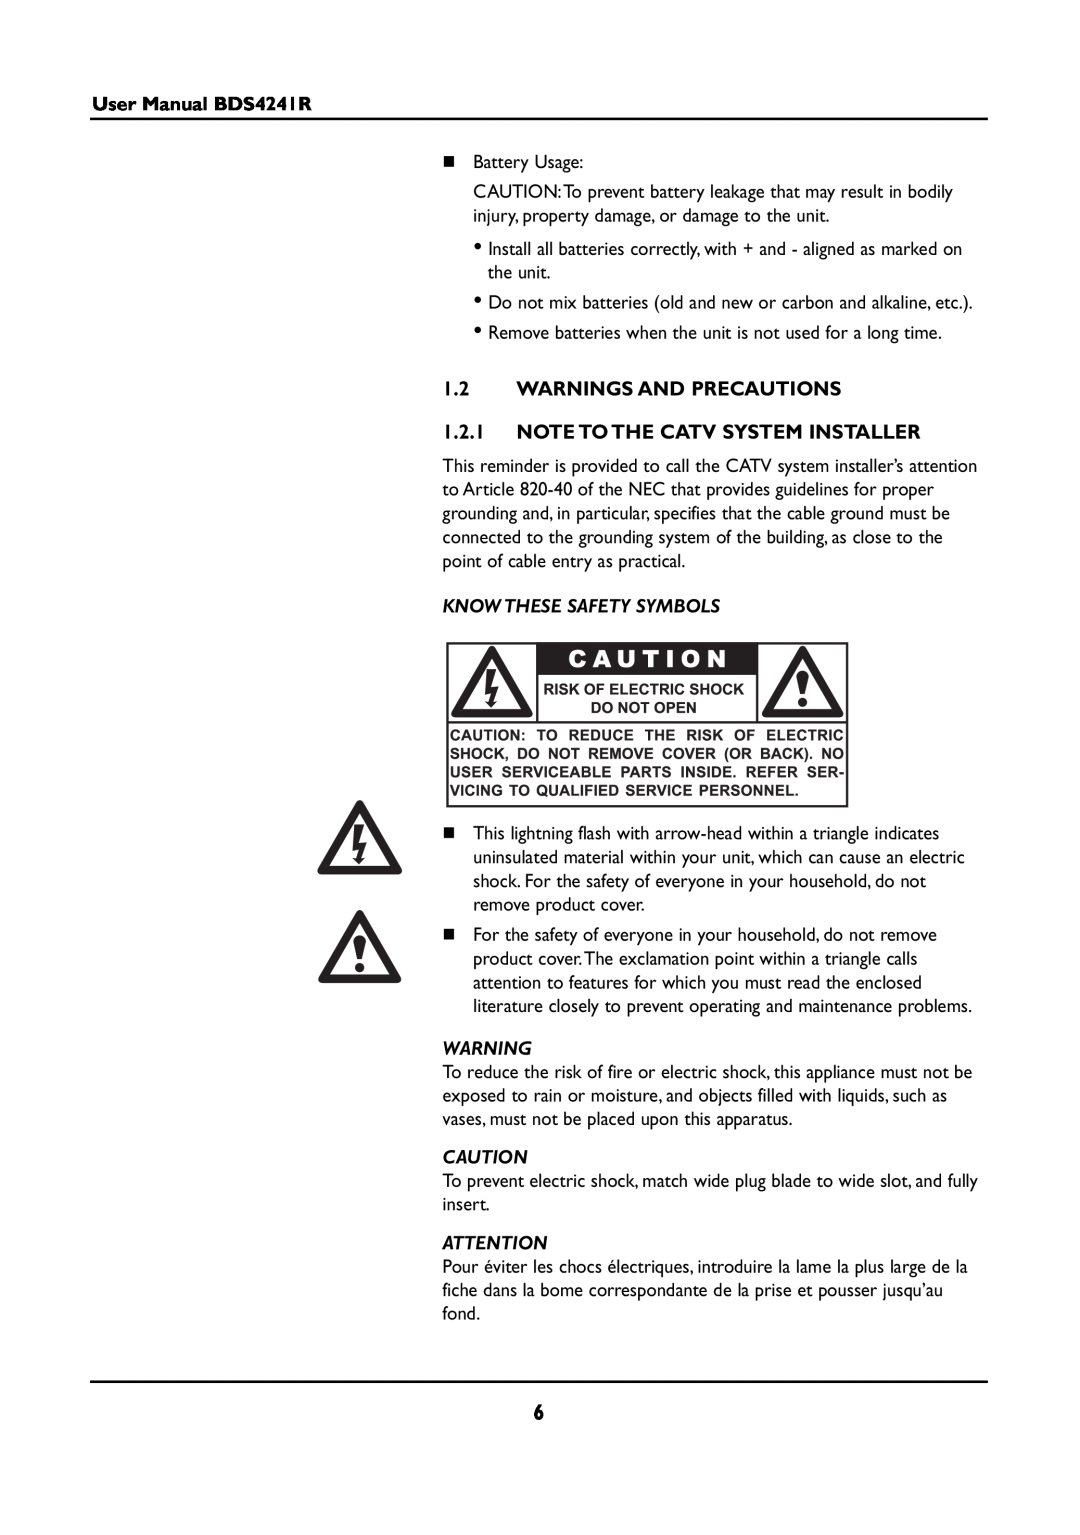 Philips BDS4241R/00 manual WARNINGS AND PRECAUTIONS 1.2.1 NOTE TO THE CATV SYSTEM INSTALLER, Know These Safety Symbols 